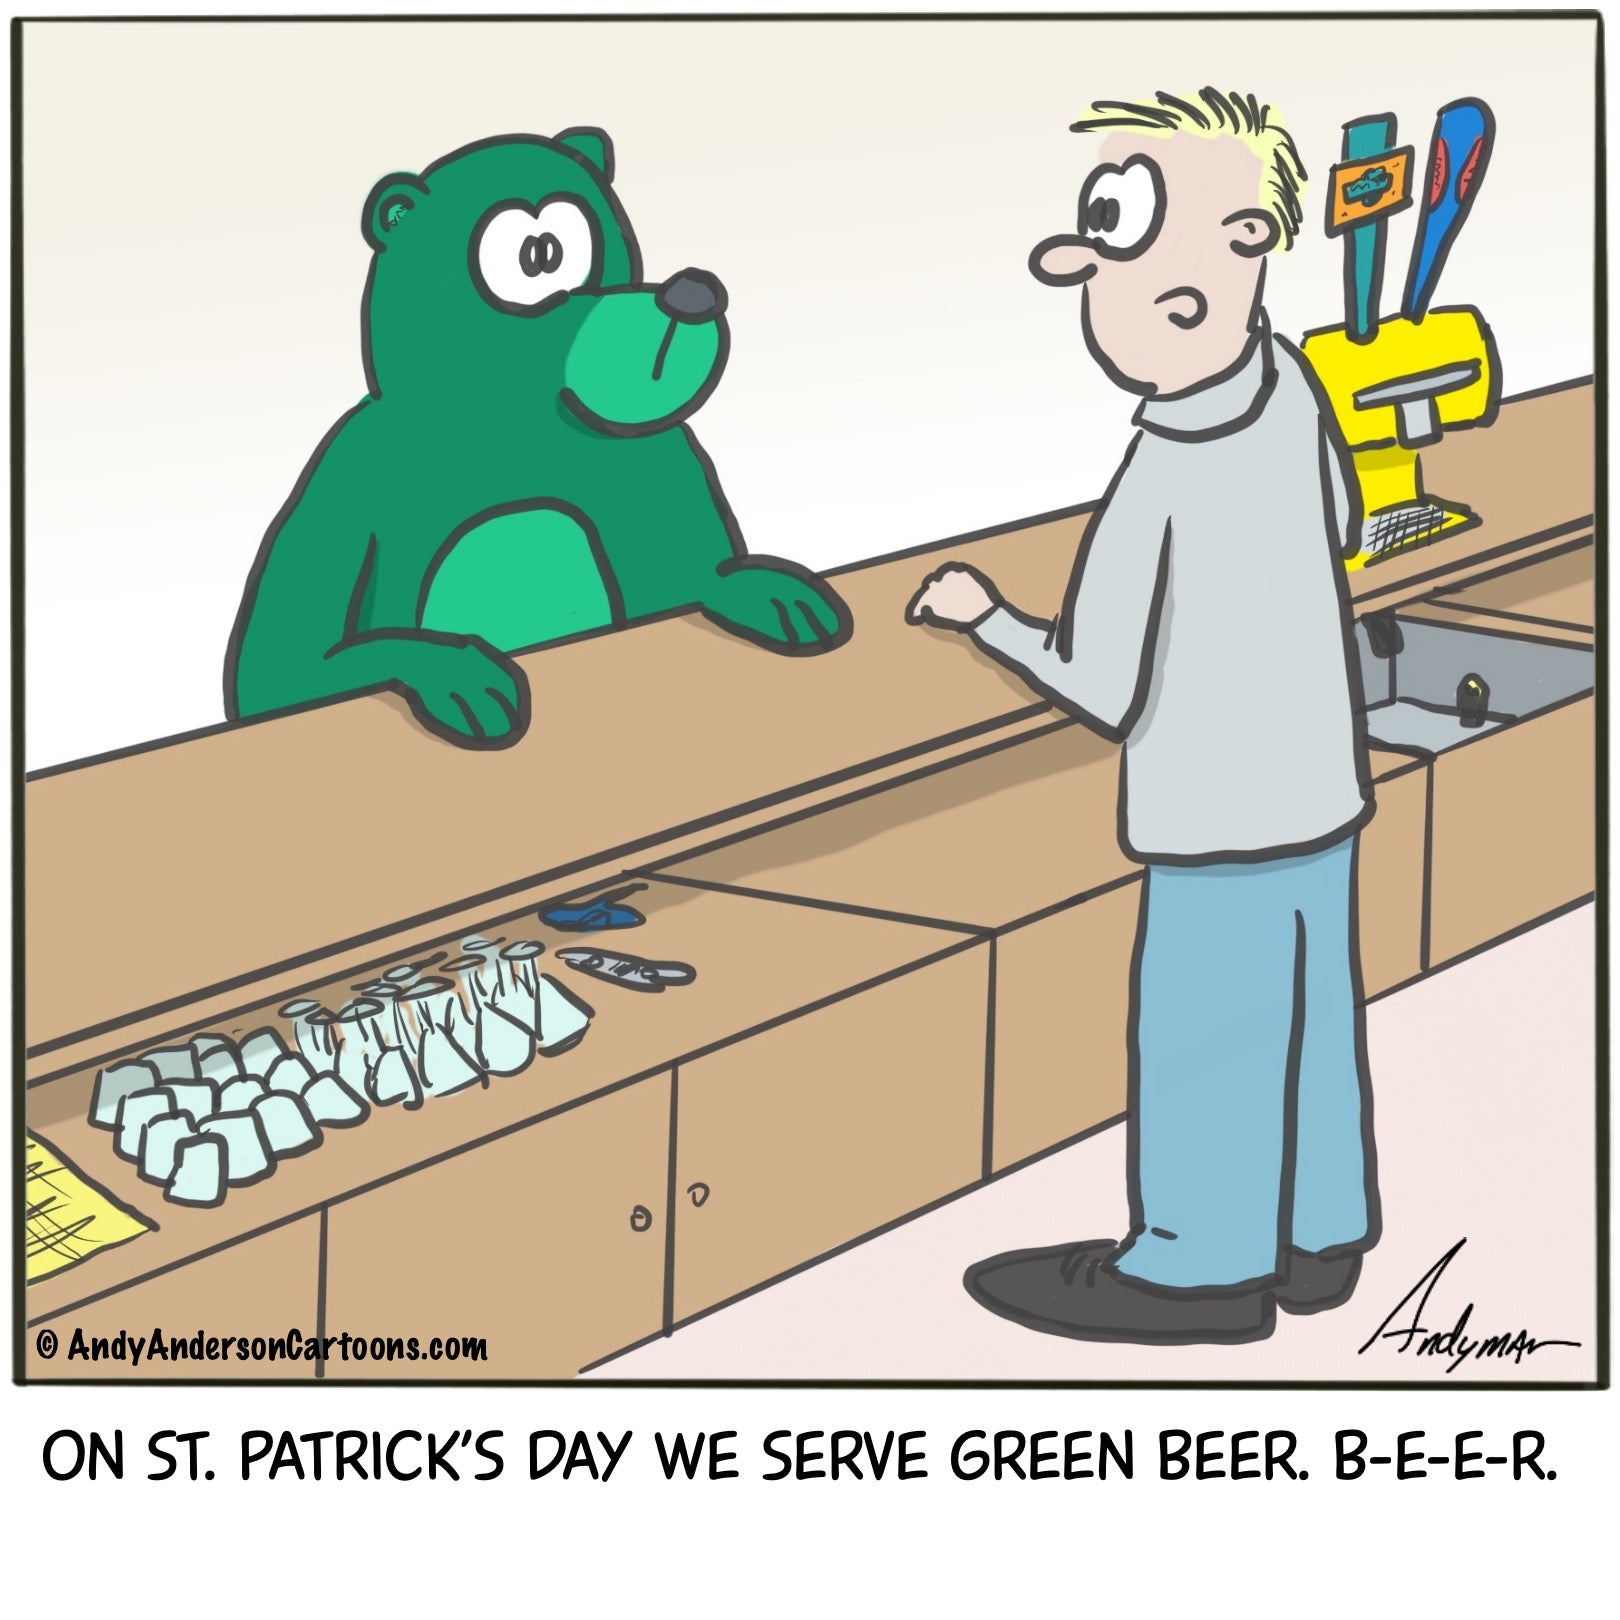 Cartoon about serving green beer to a green bear on St. Patrick's Day